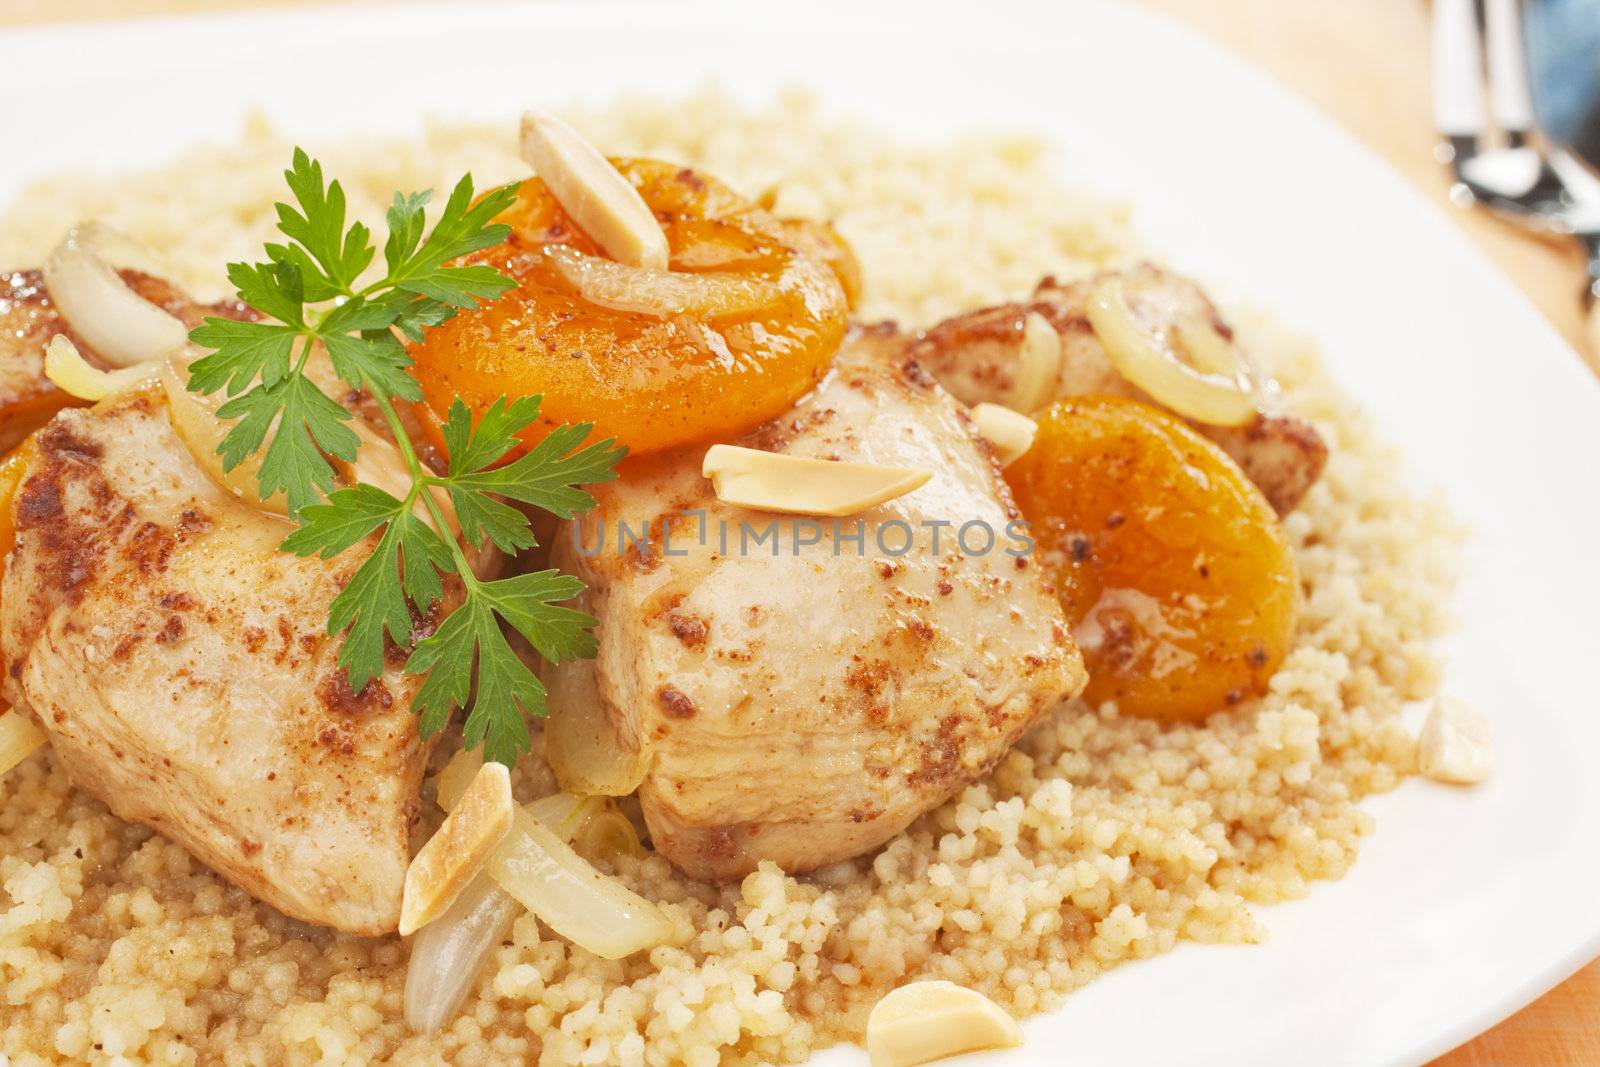 A Moroccan dish, chicken and apricot tajine served over couscous. Tagine is flavoured with ginger, cinnamon, chili and honey.